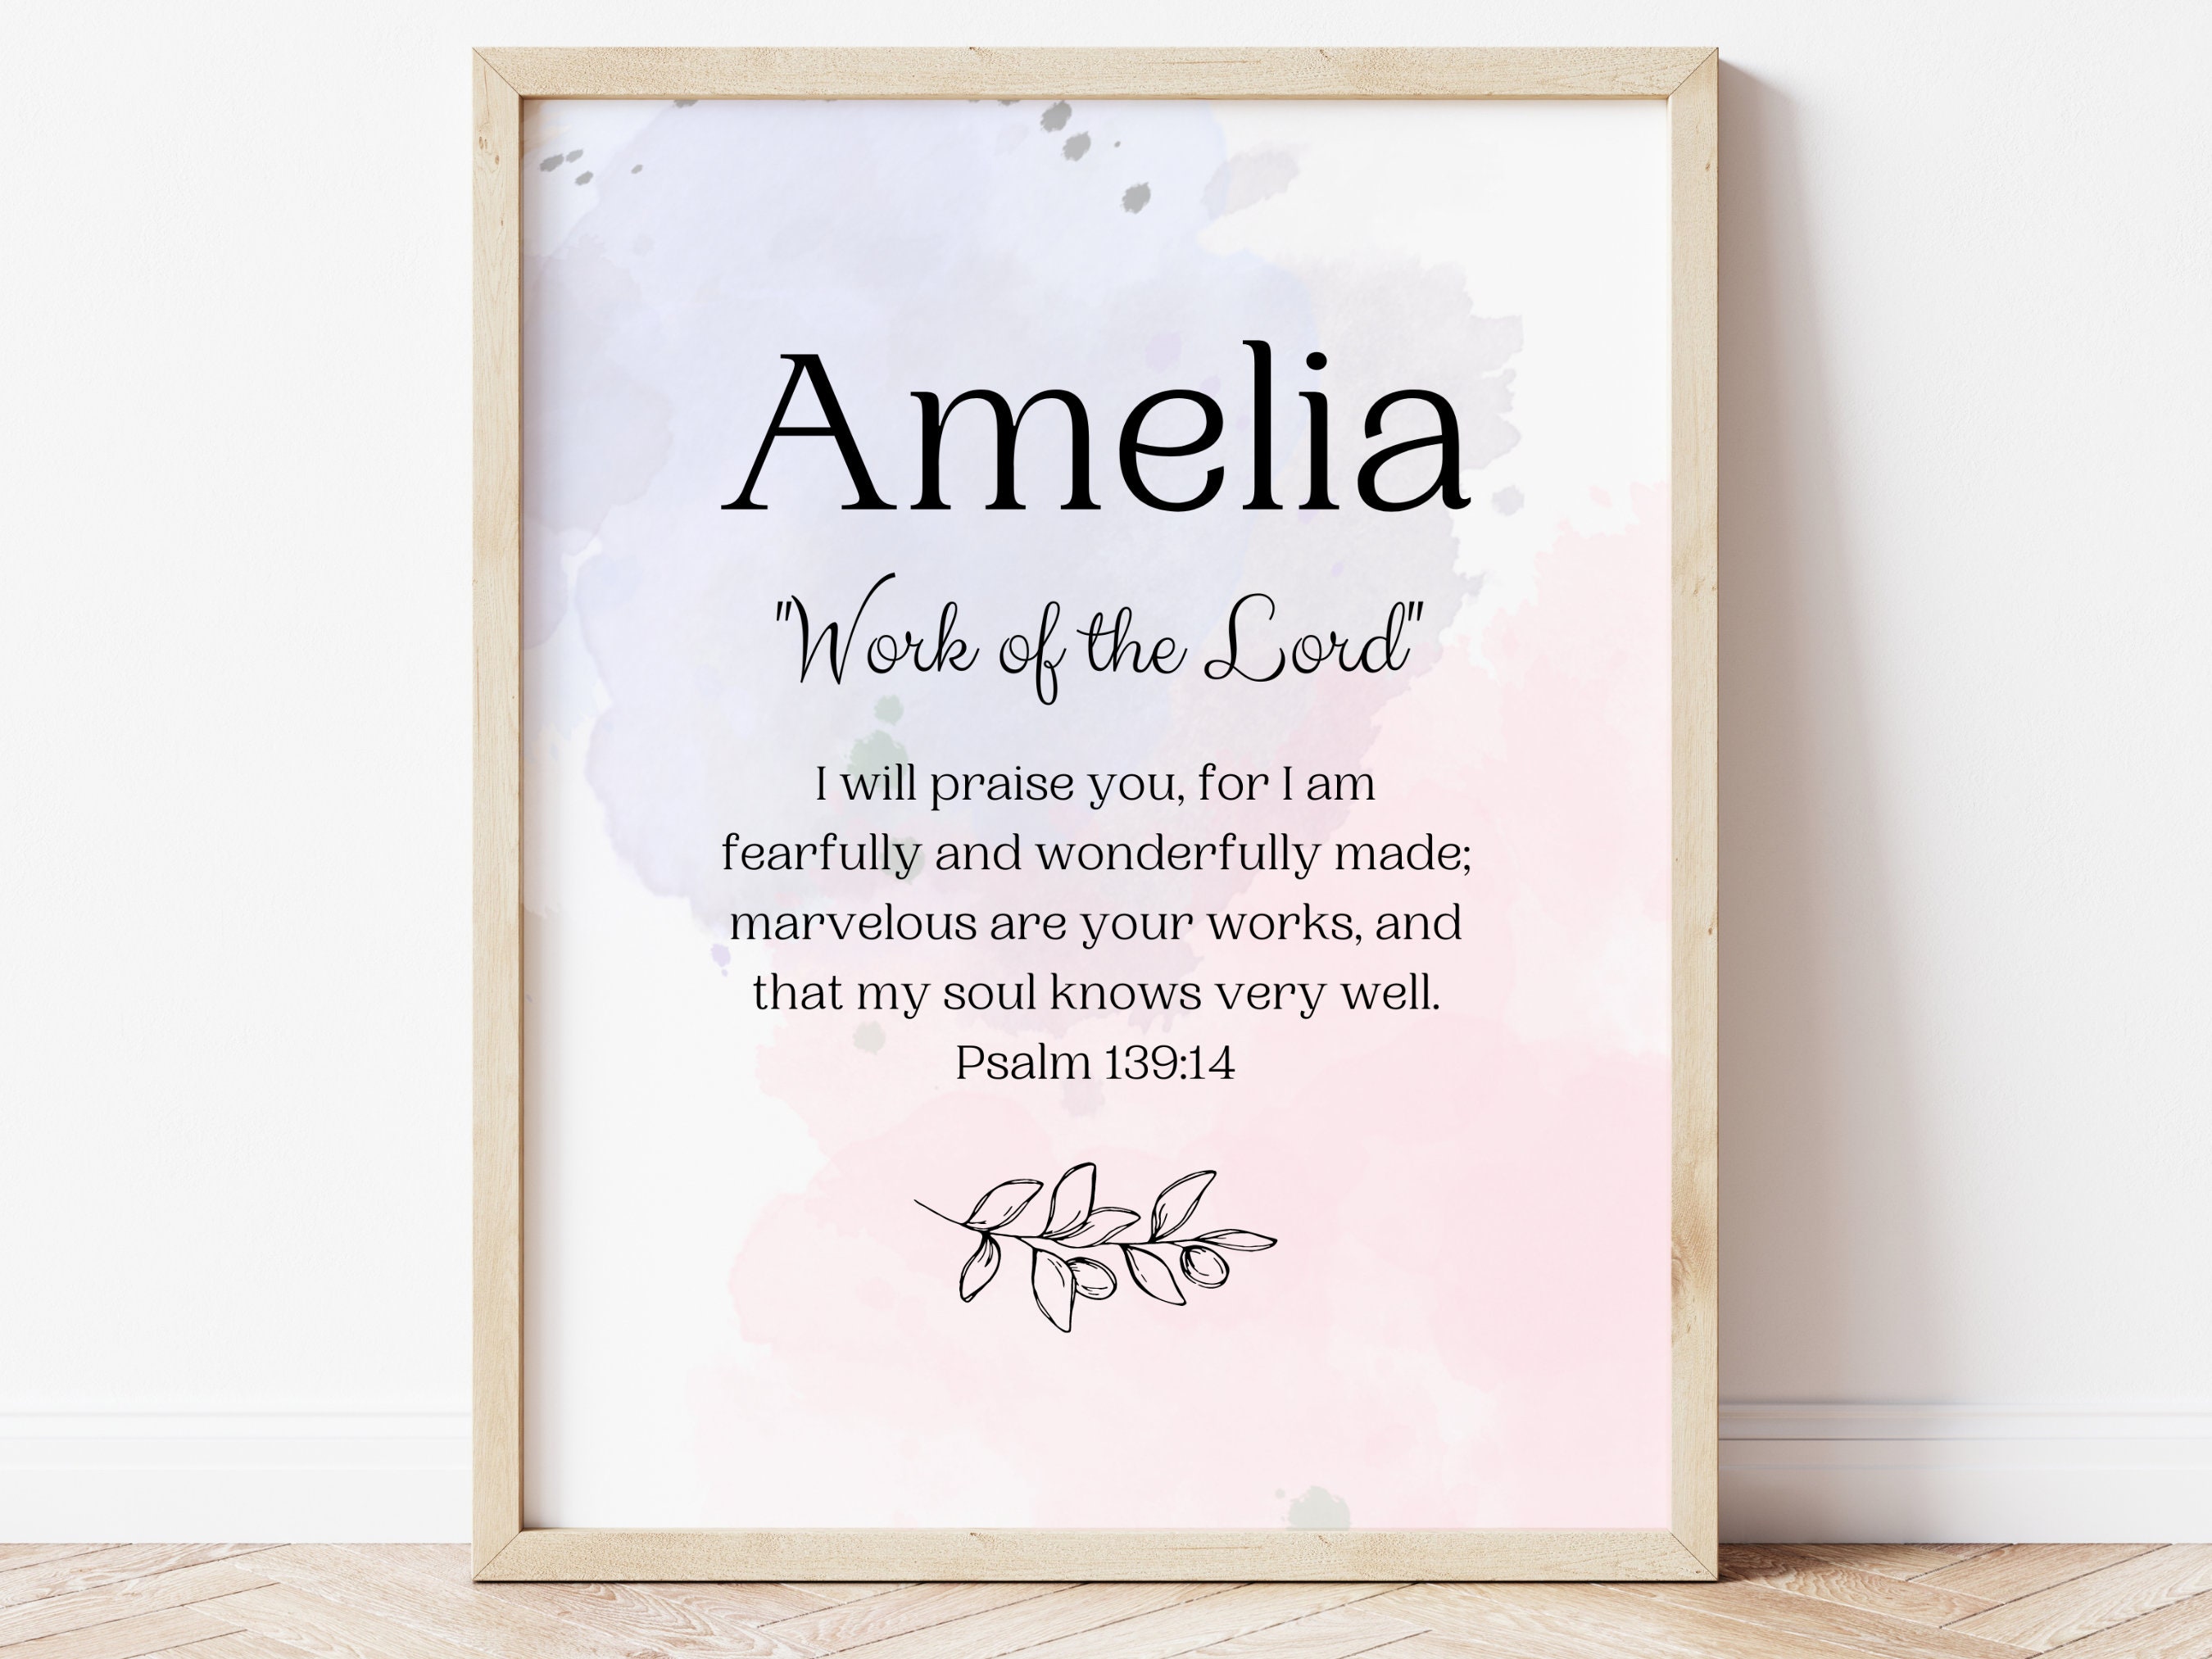 Name Meaning Print Biblical Name Meaning Sign Baby Name 